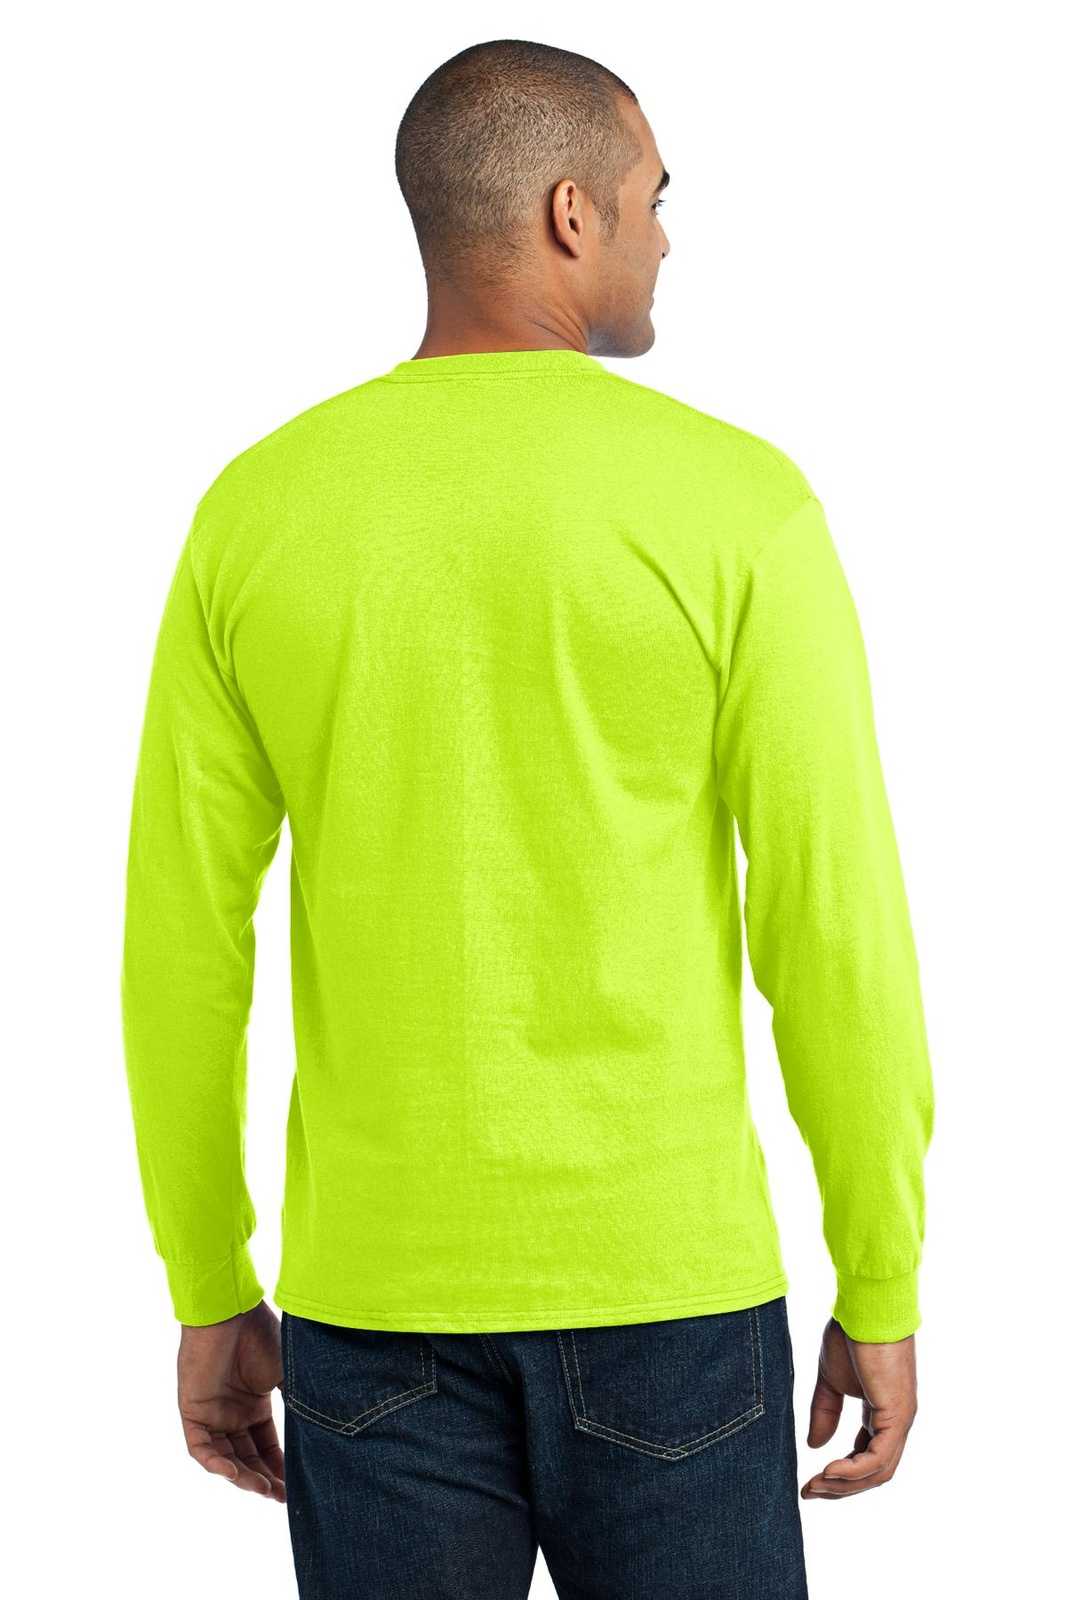 Port & Company PC55LS Long Sleeve Core Blend Tee - Safety Green - HIT a Double - 1